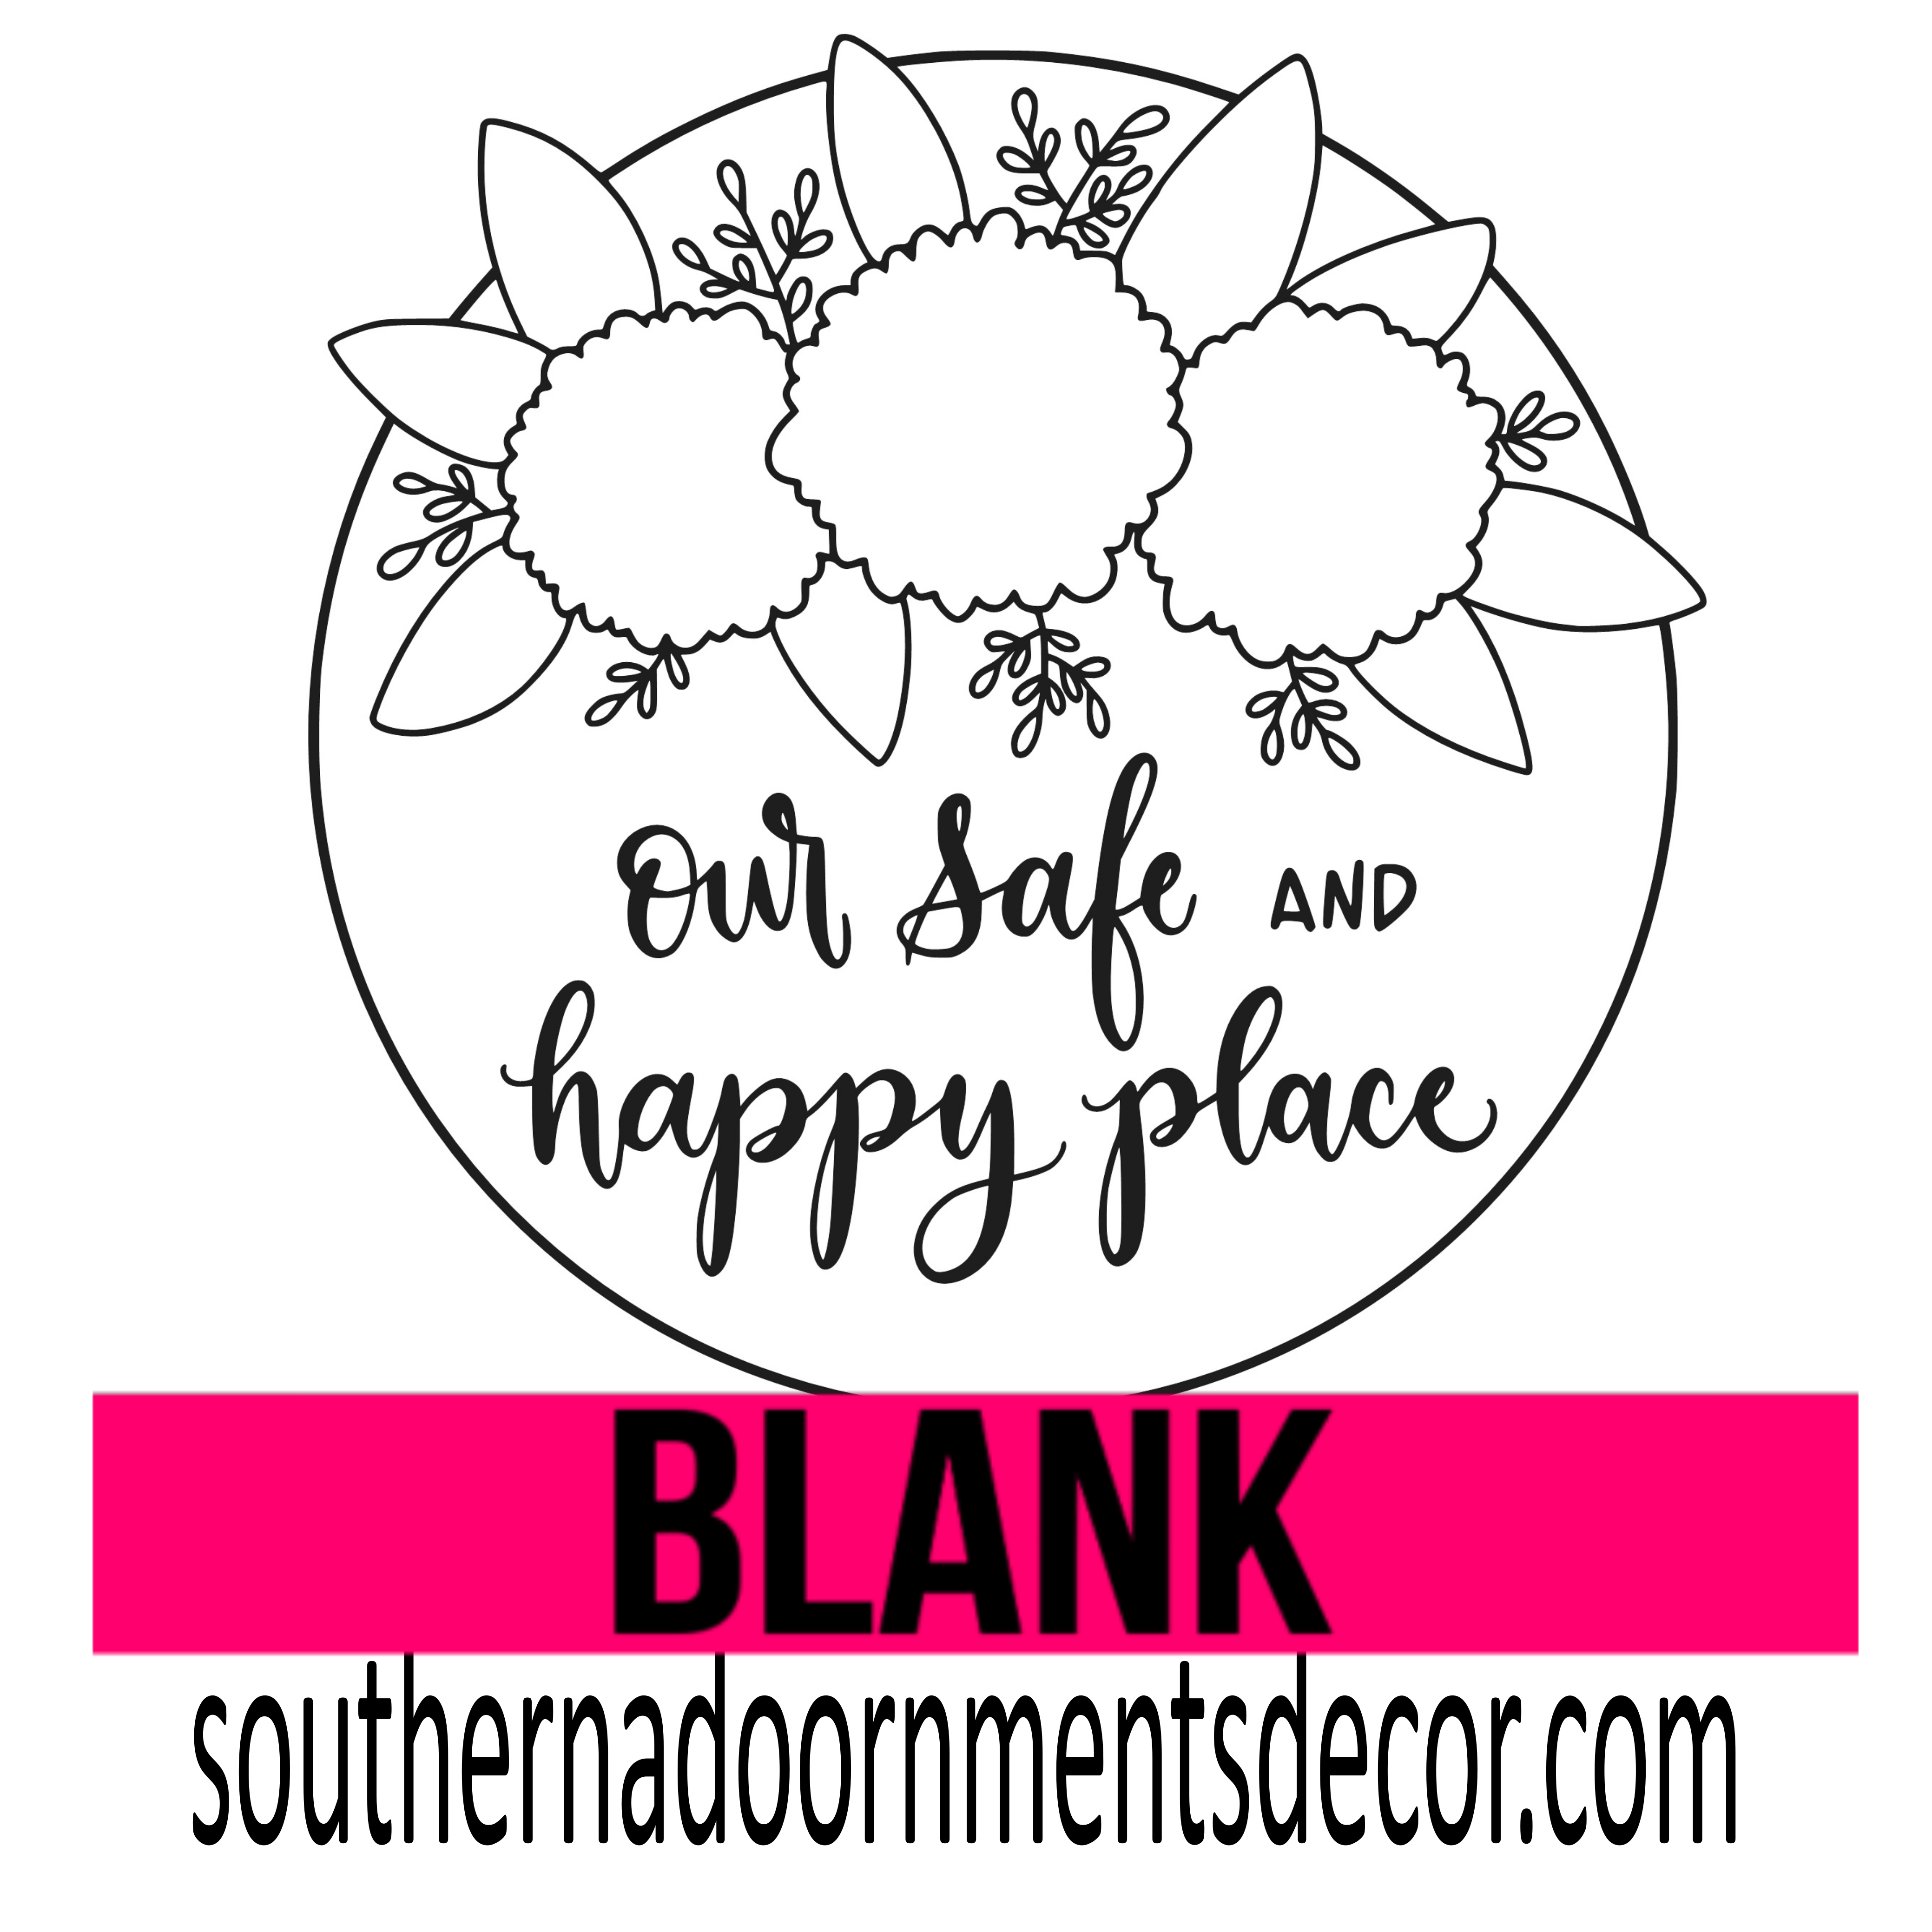 Our Safe and Happy Place Blank